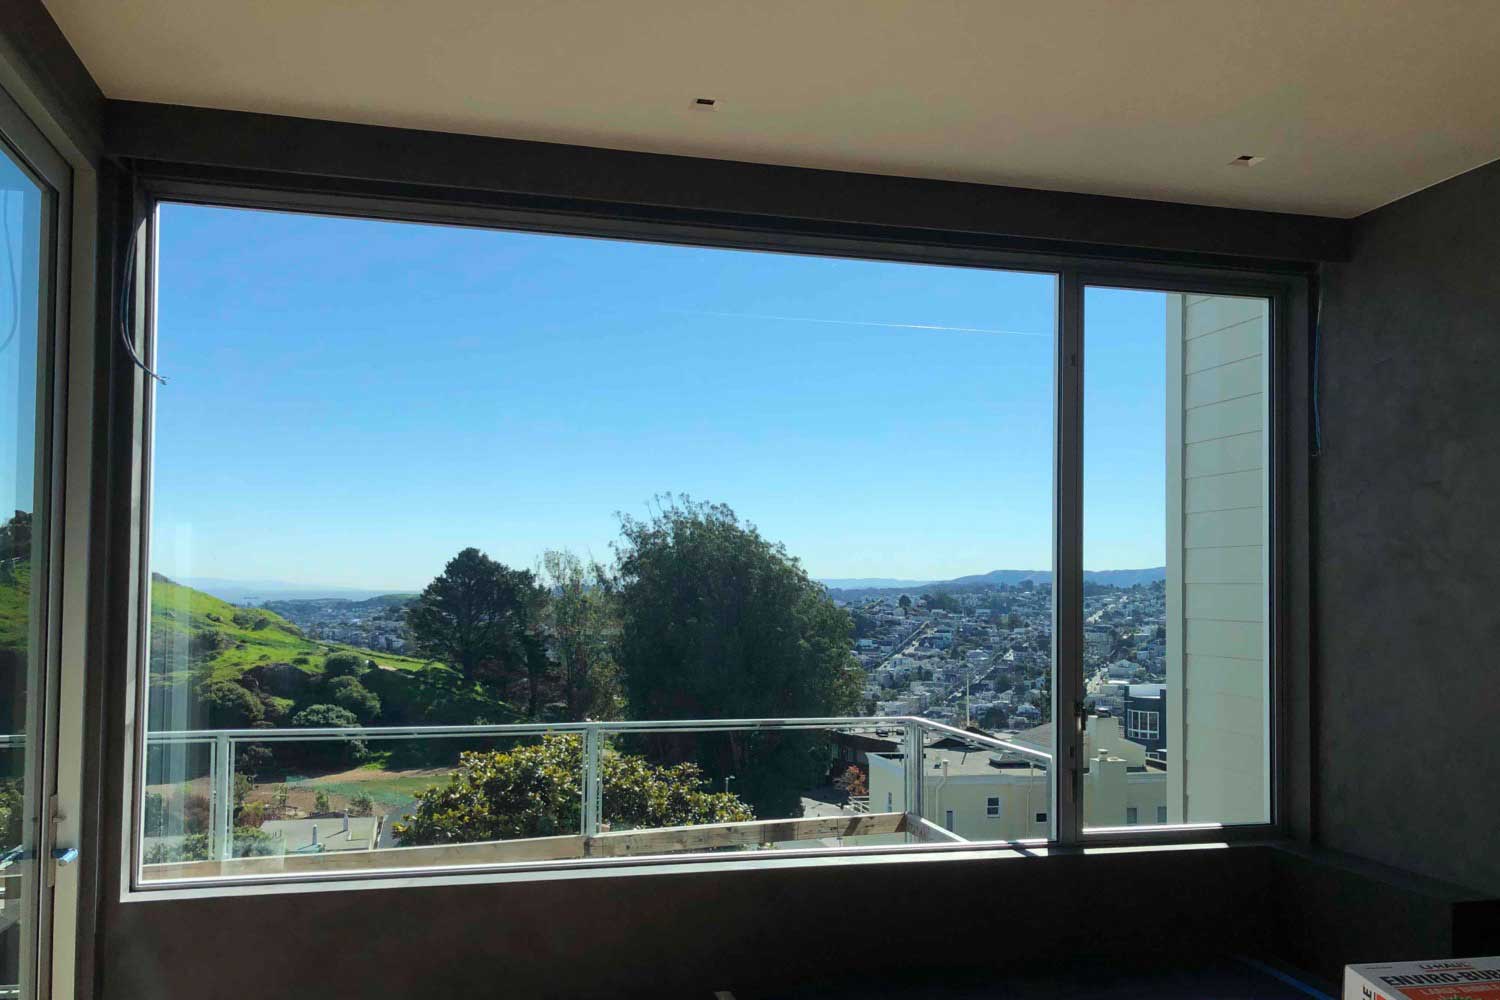 A San Francisco Home Gets New 3M Window Tint